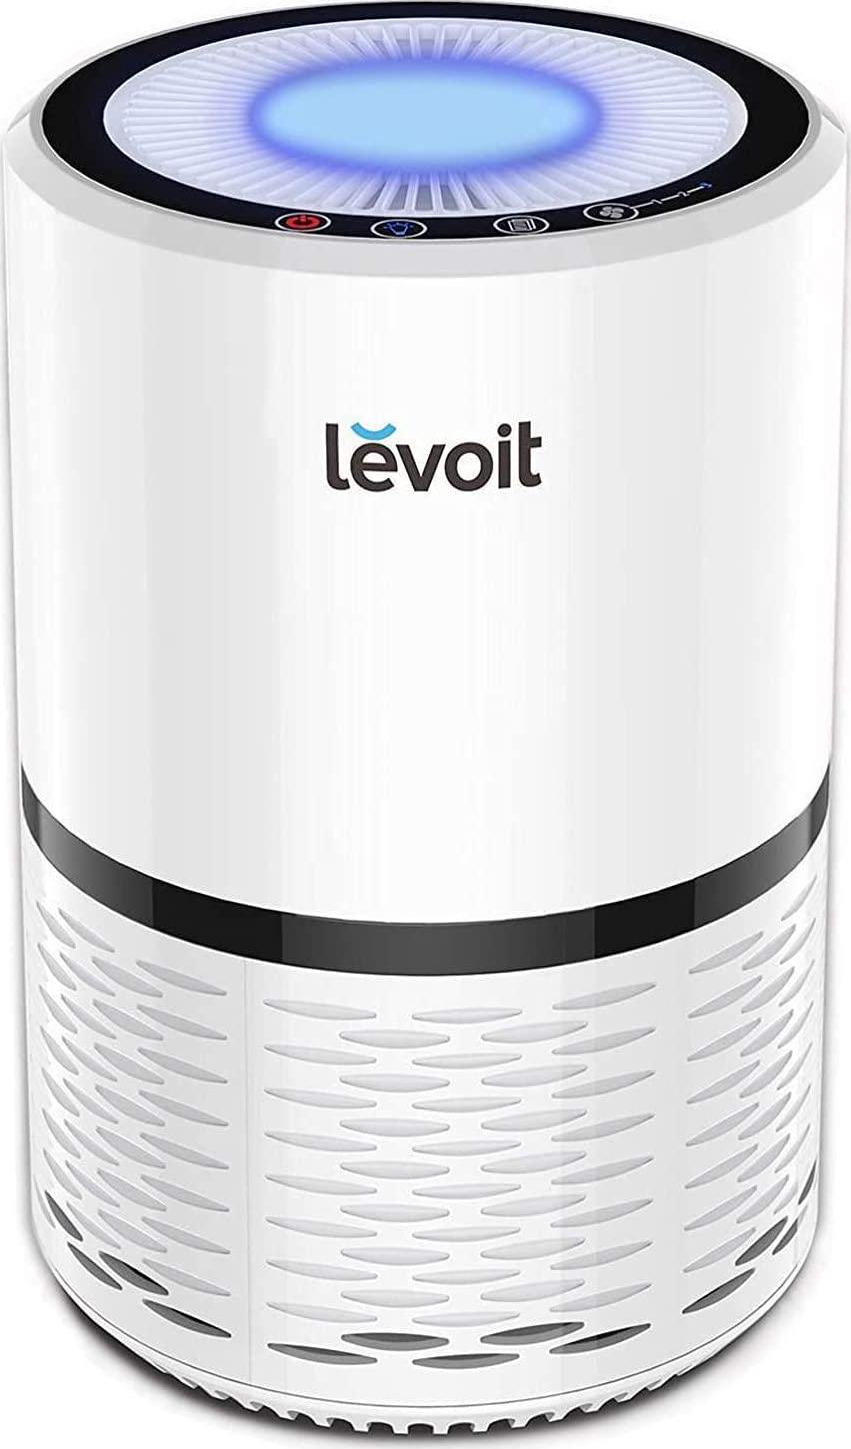 Levoit, Levoit Air Purifier for Home, Quiet H13 HEPA Filter Removes 99.97% of Pollen, Allergy Particles, Dust, Smoke, Portable Air Cleaner for Bedroom with 3 Speeds, Night Light, Filter Change Reminder